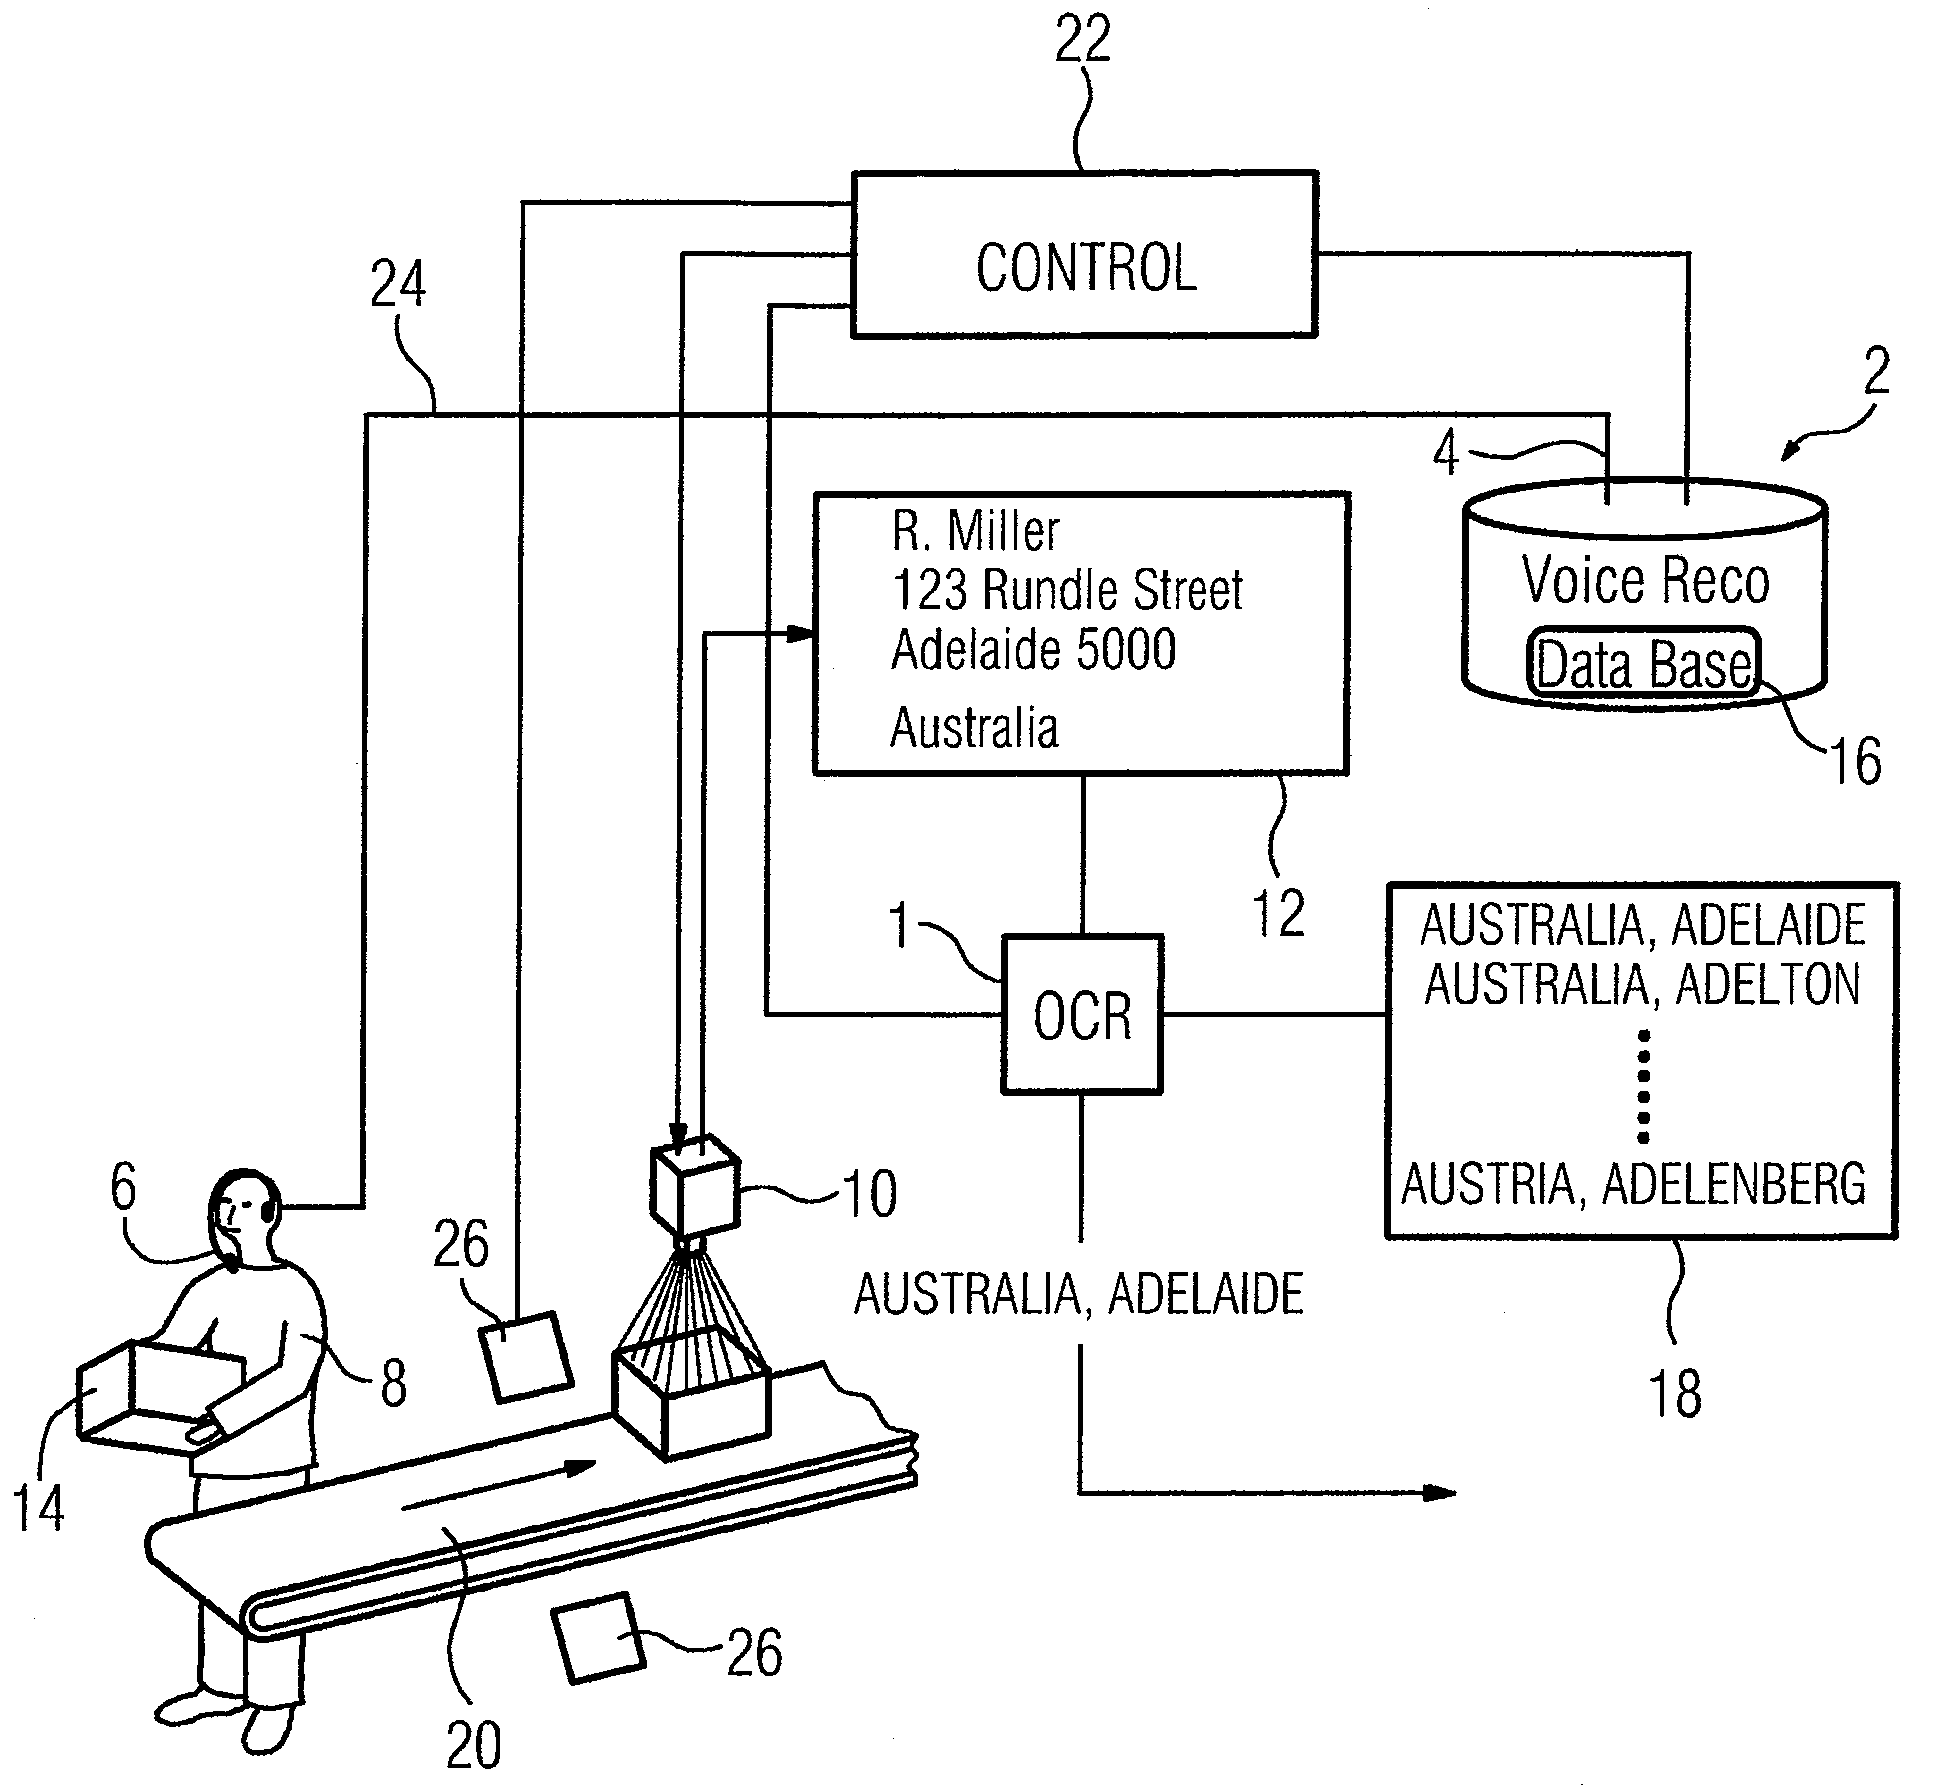 System and Method for Sorting Objects Using OCR and Speech Recognition Techniques